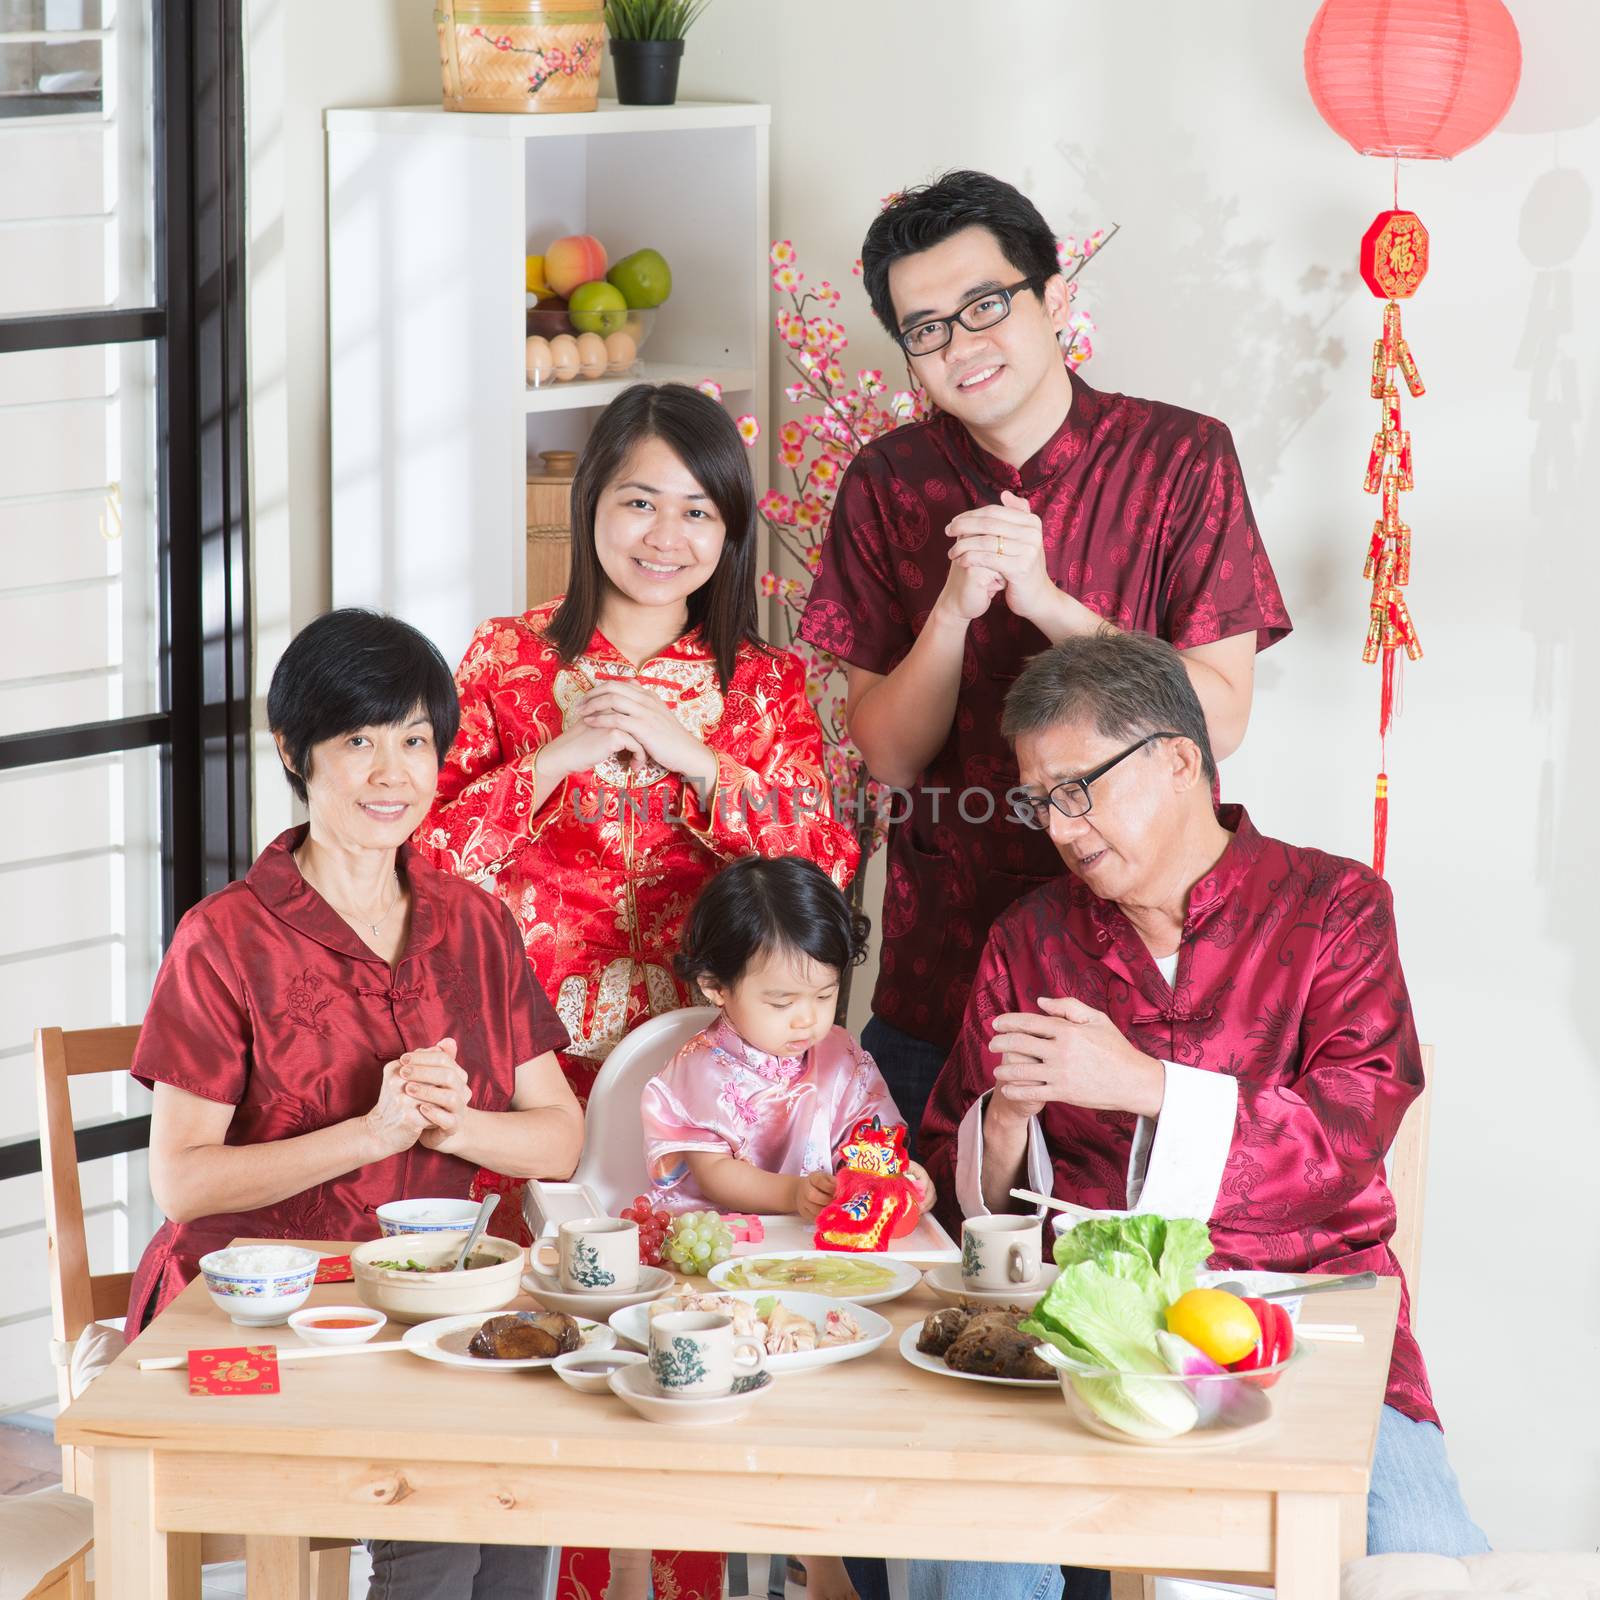 Spring seasons Chinese New Year, reunion dinner. Happy Asian Chinese multi generation family with red cheongsam greeting while dining at home.